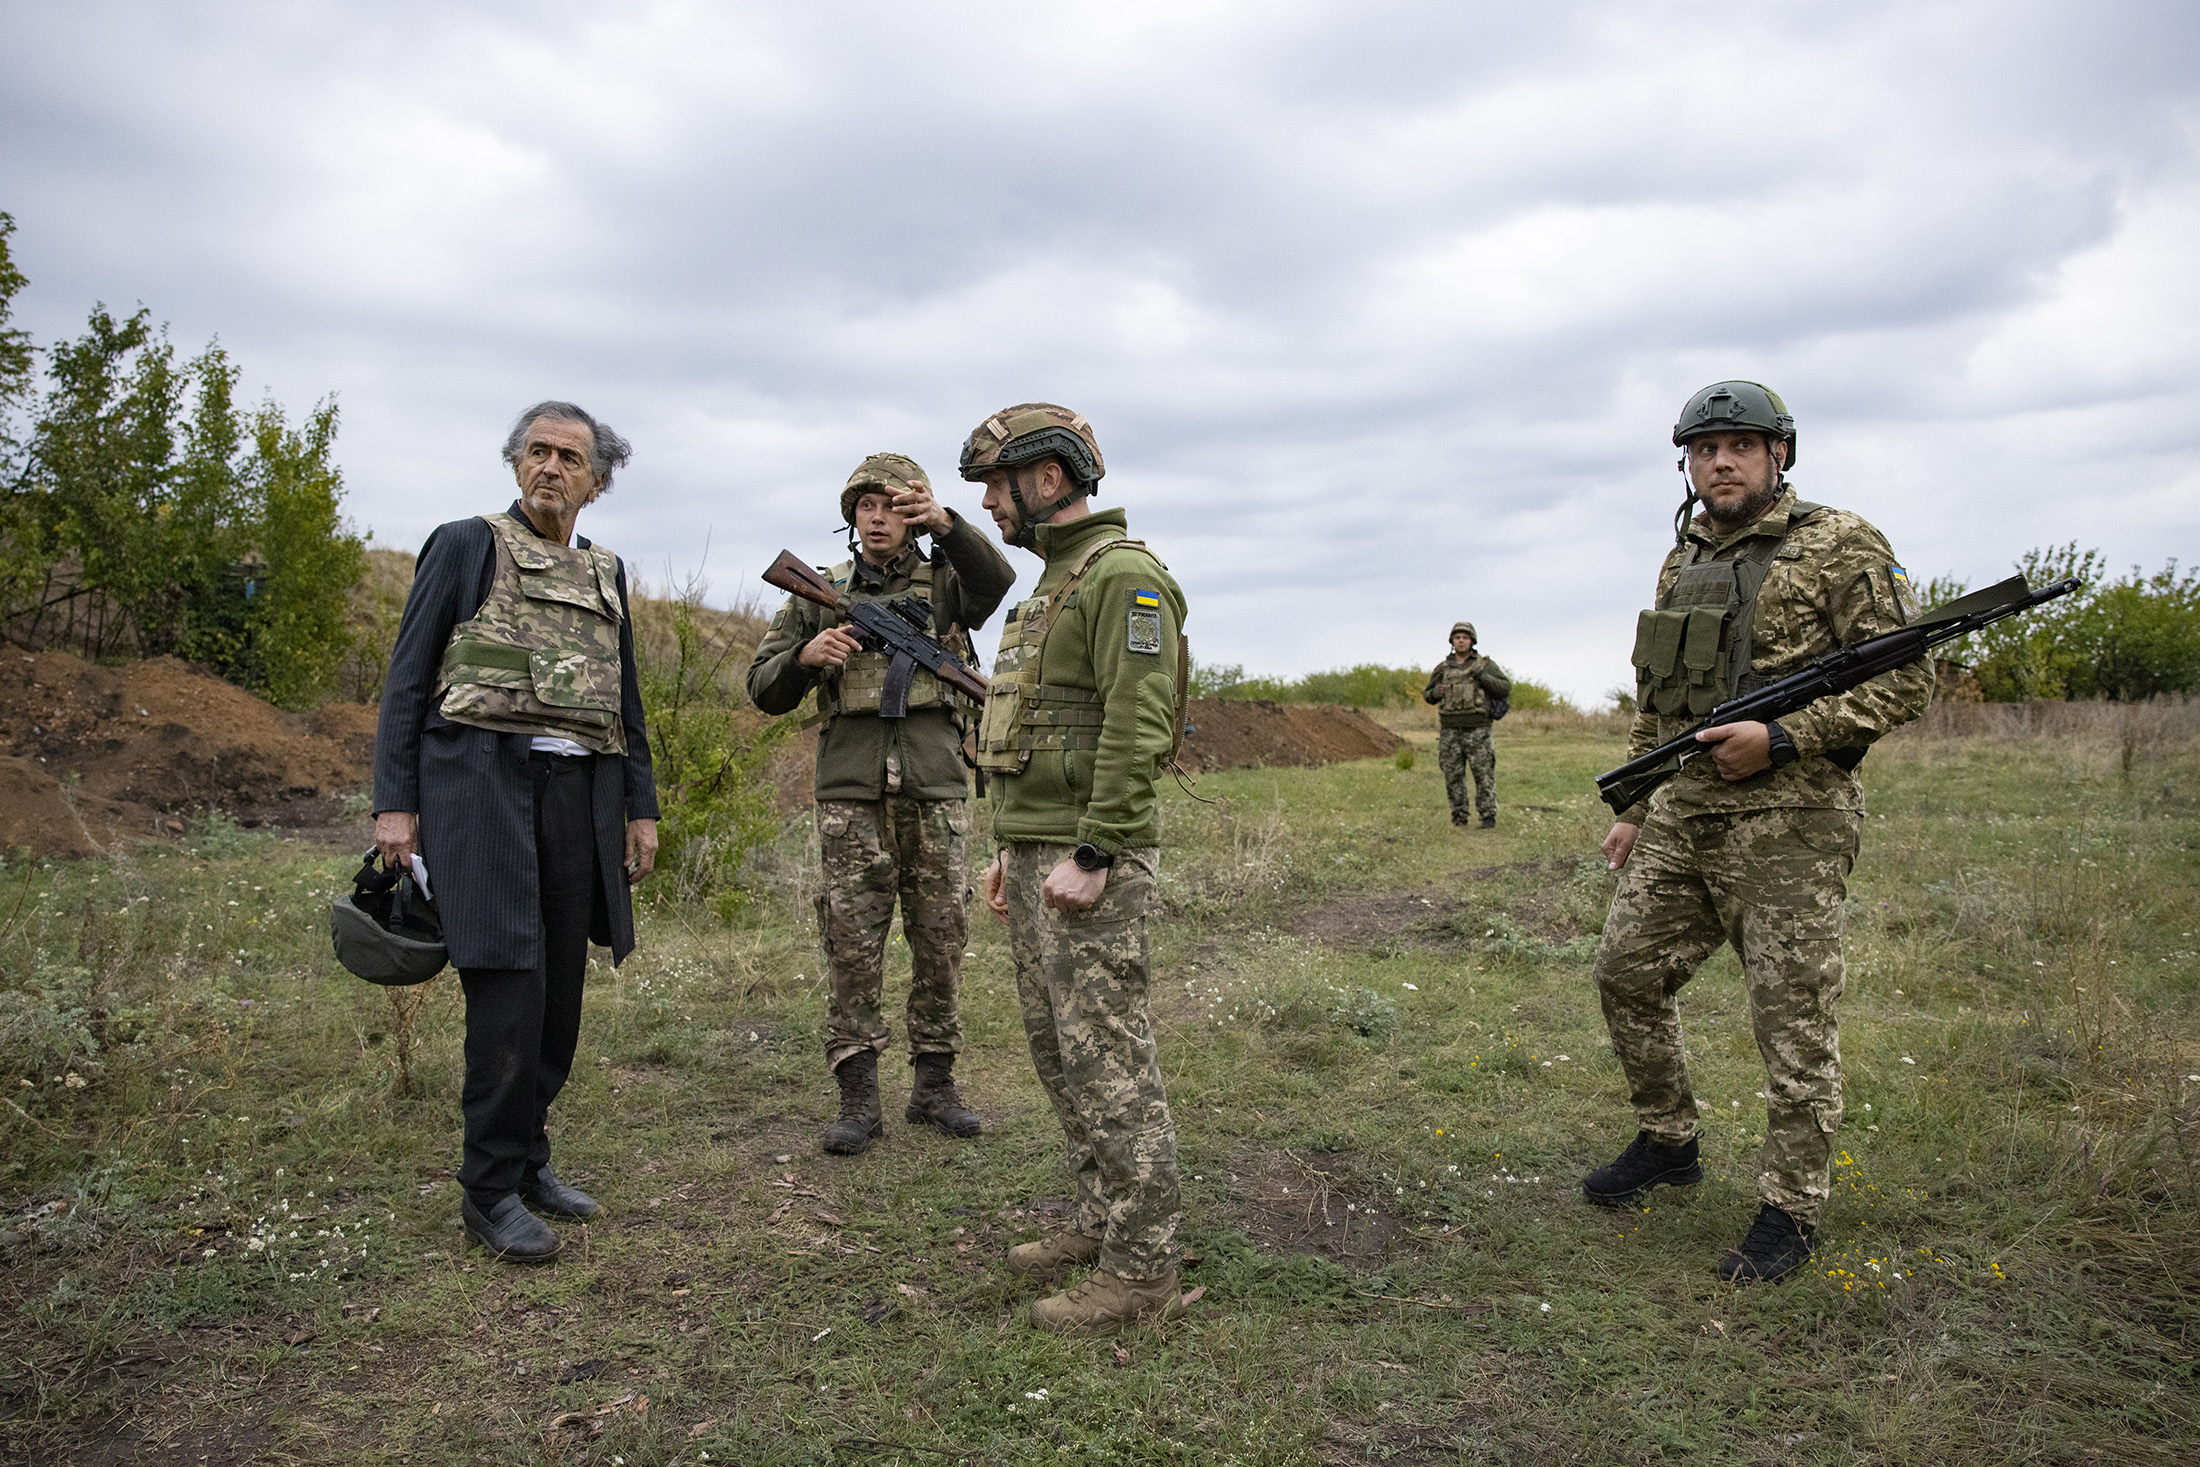 On the outskirts of the Lyman trenches, BHL meets with the Ukrainian military.